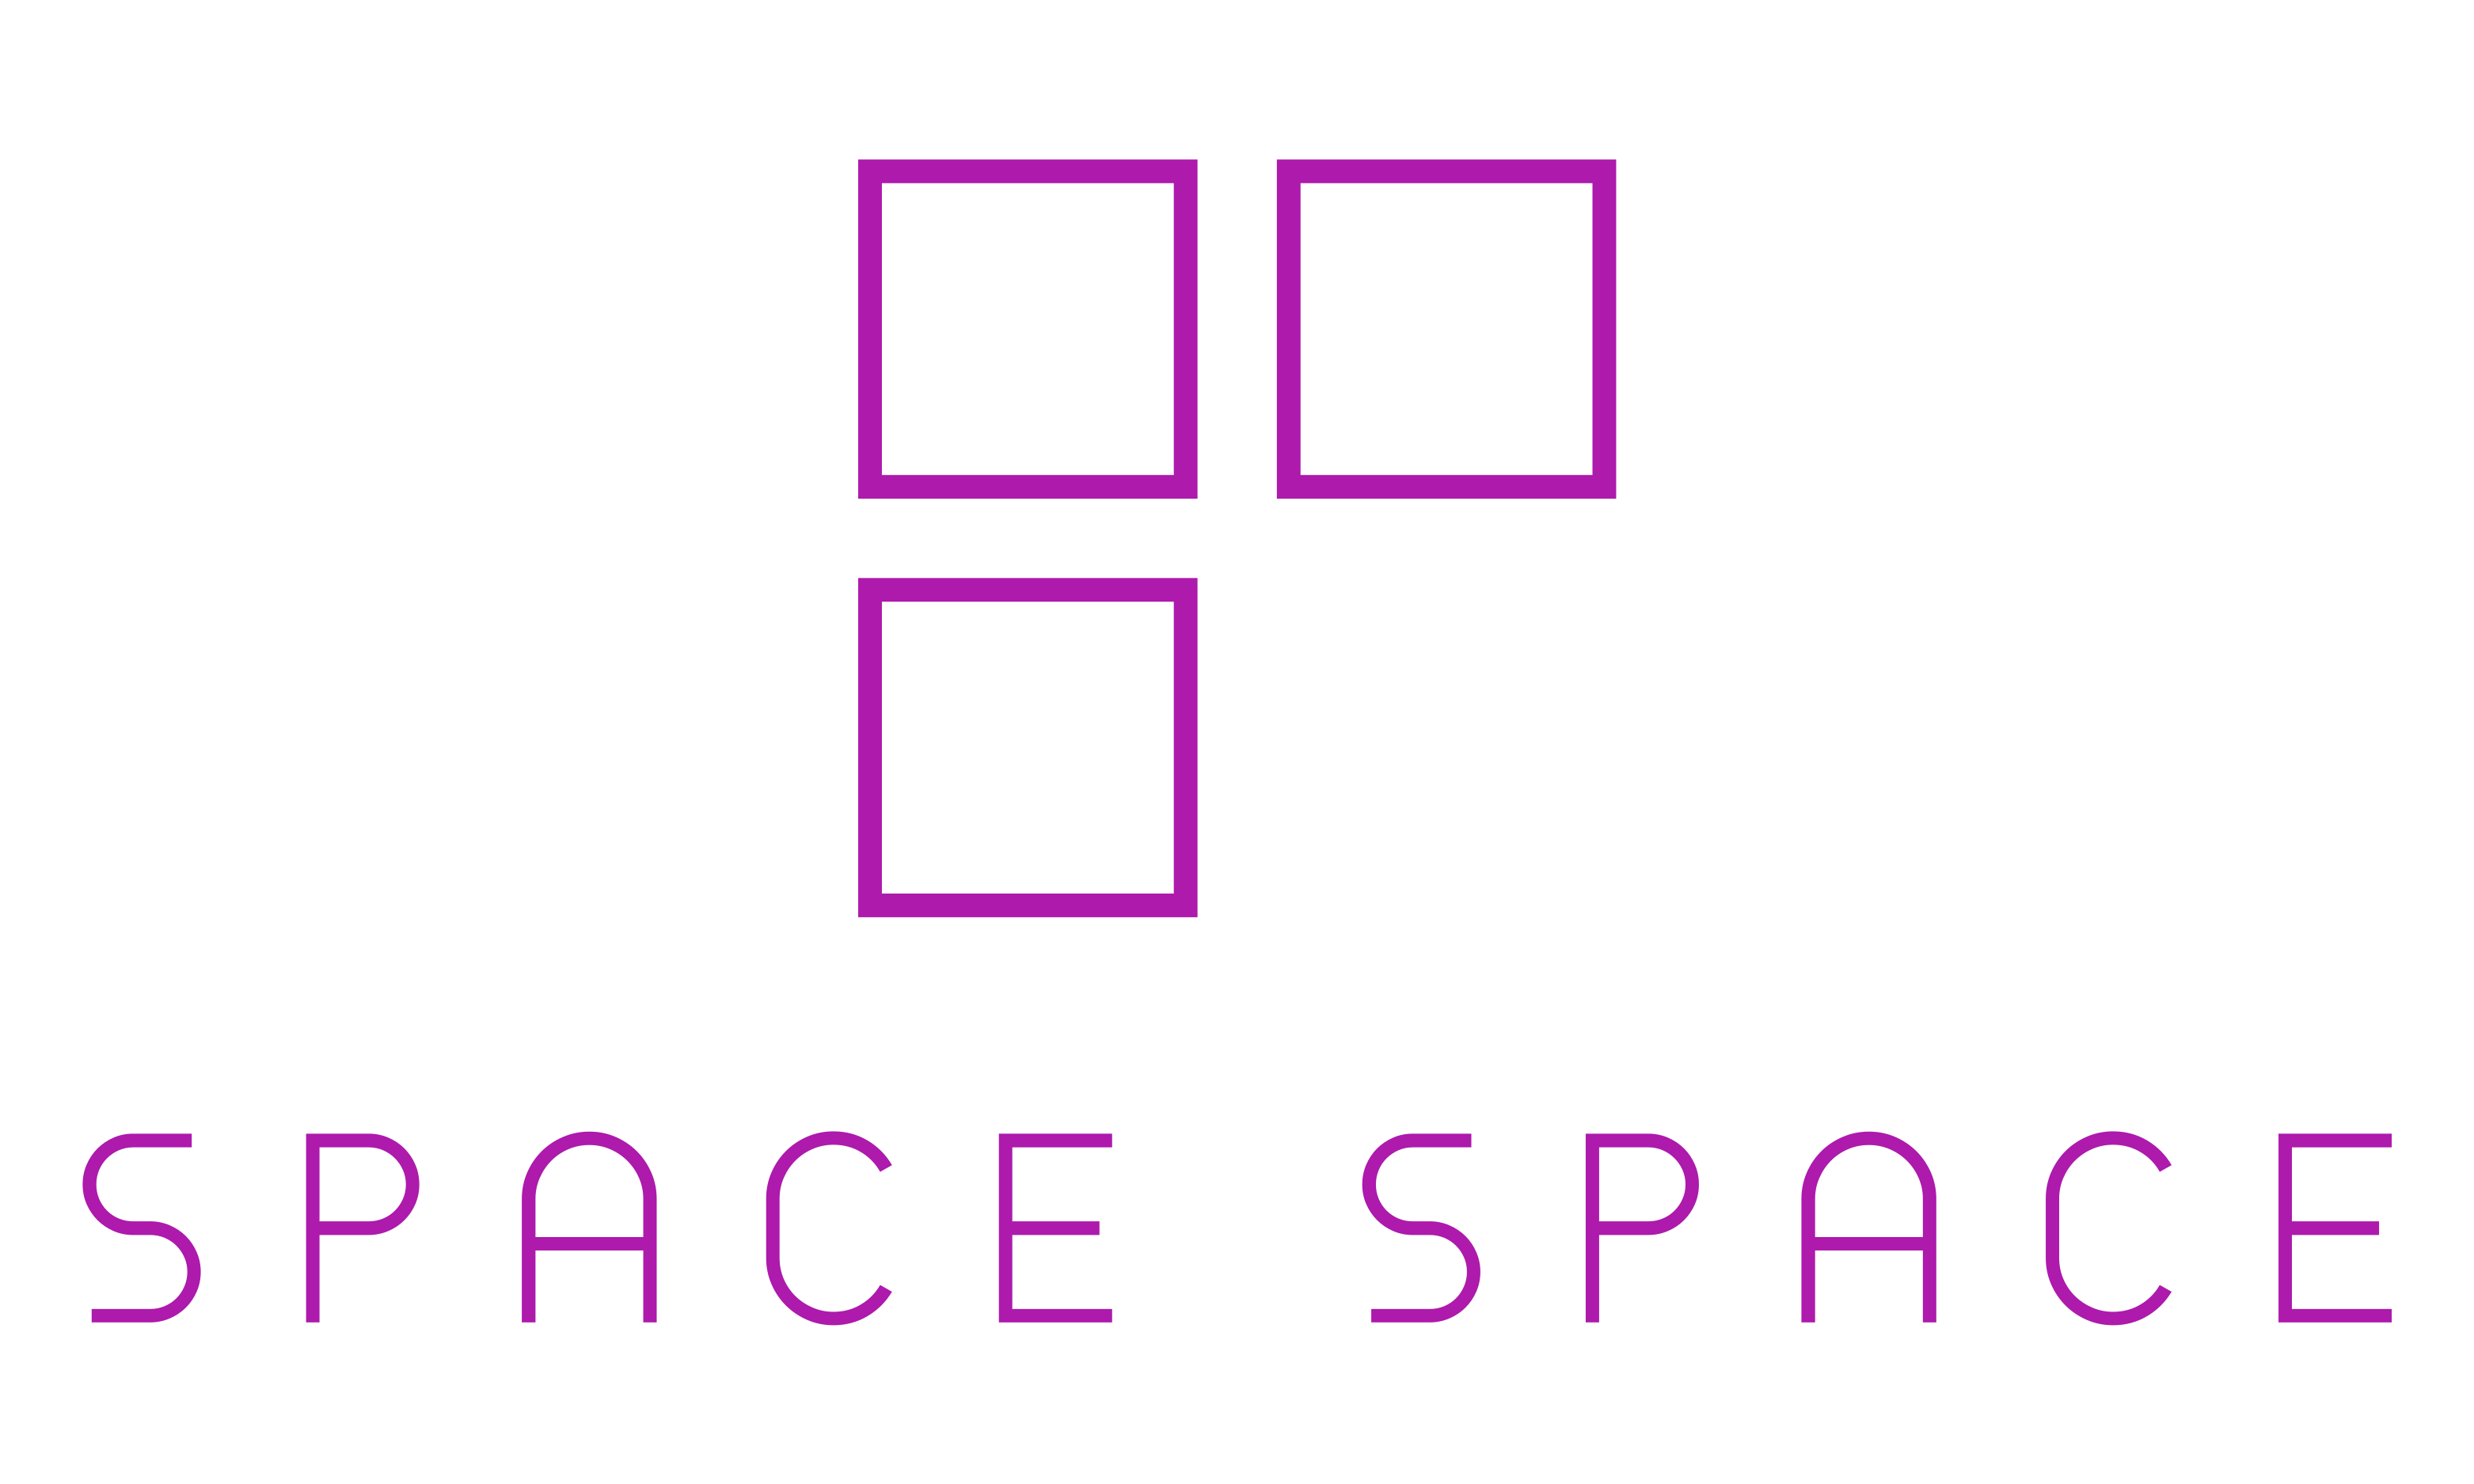 SPACE SPACE